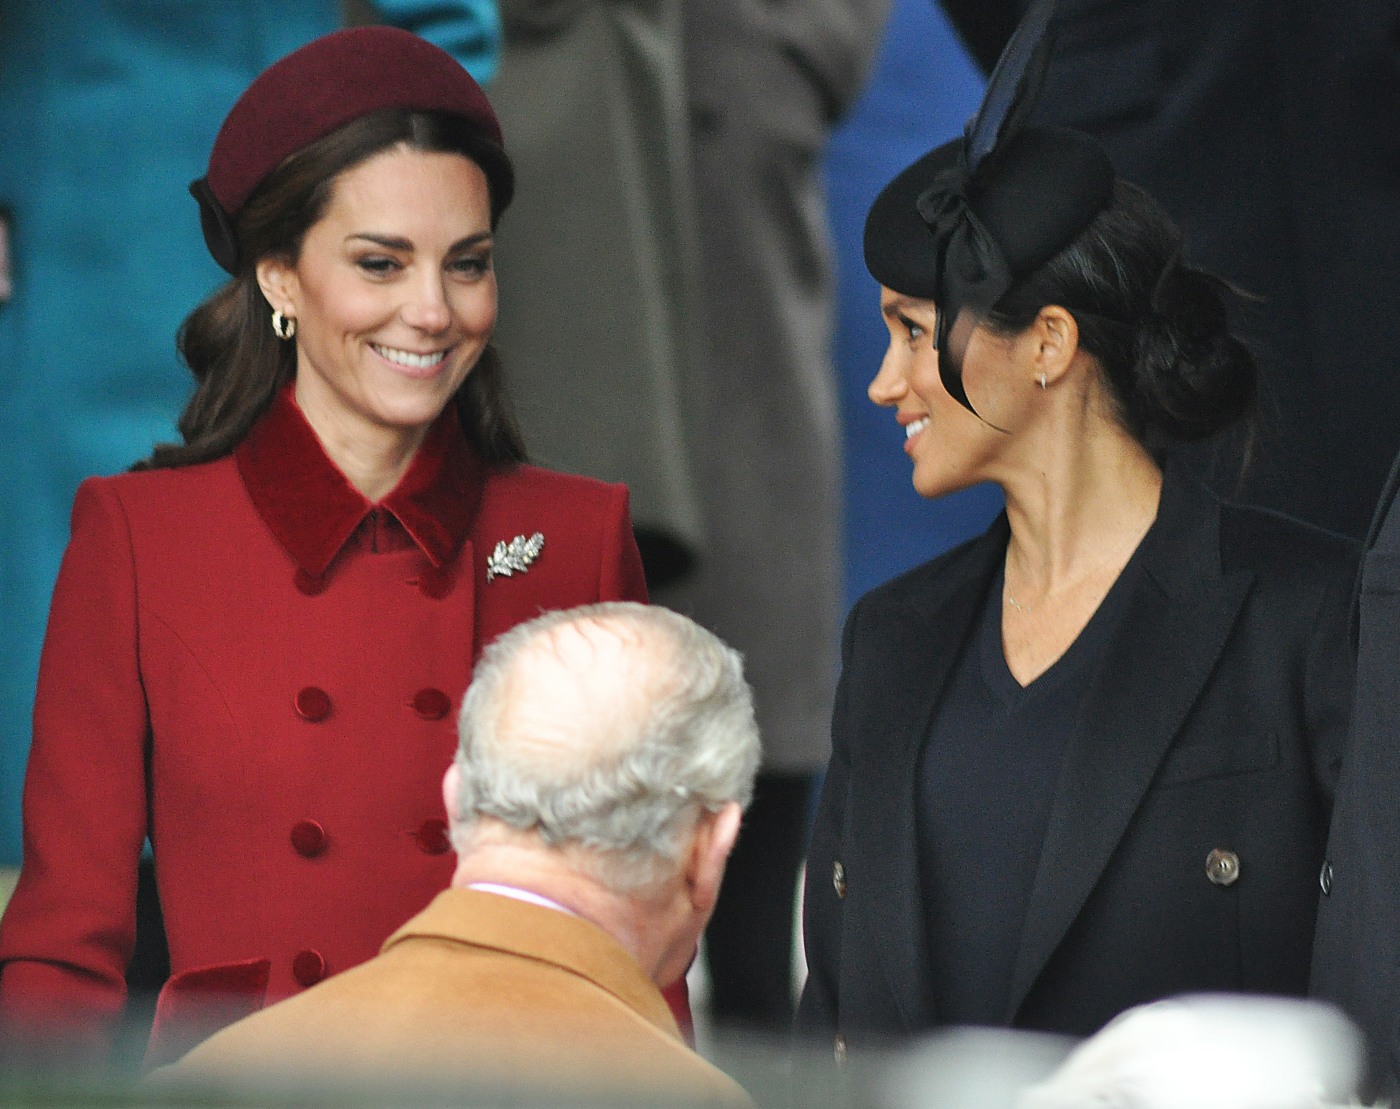 Duchesses Cambridge (left) and Sussex laughing together after the Xmas Day service at Sandringham Church, 25th December, 2018.